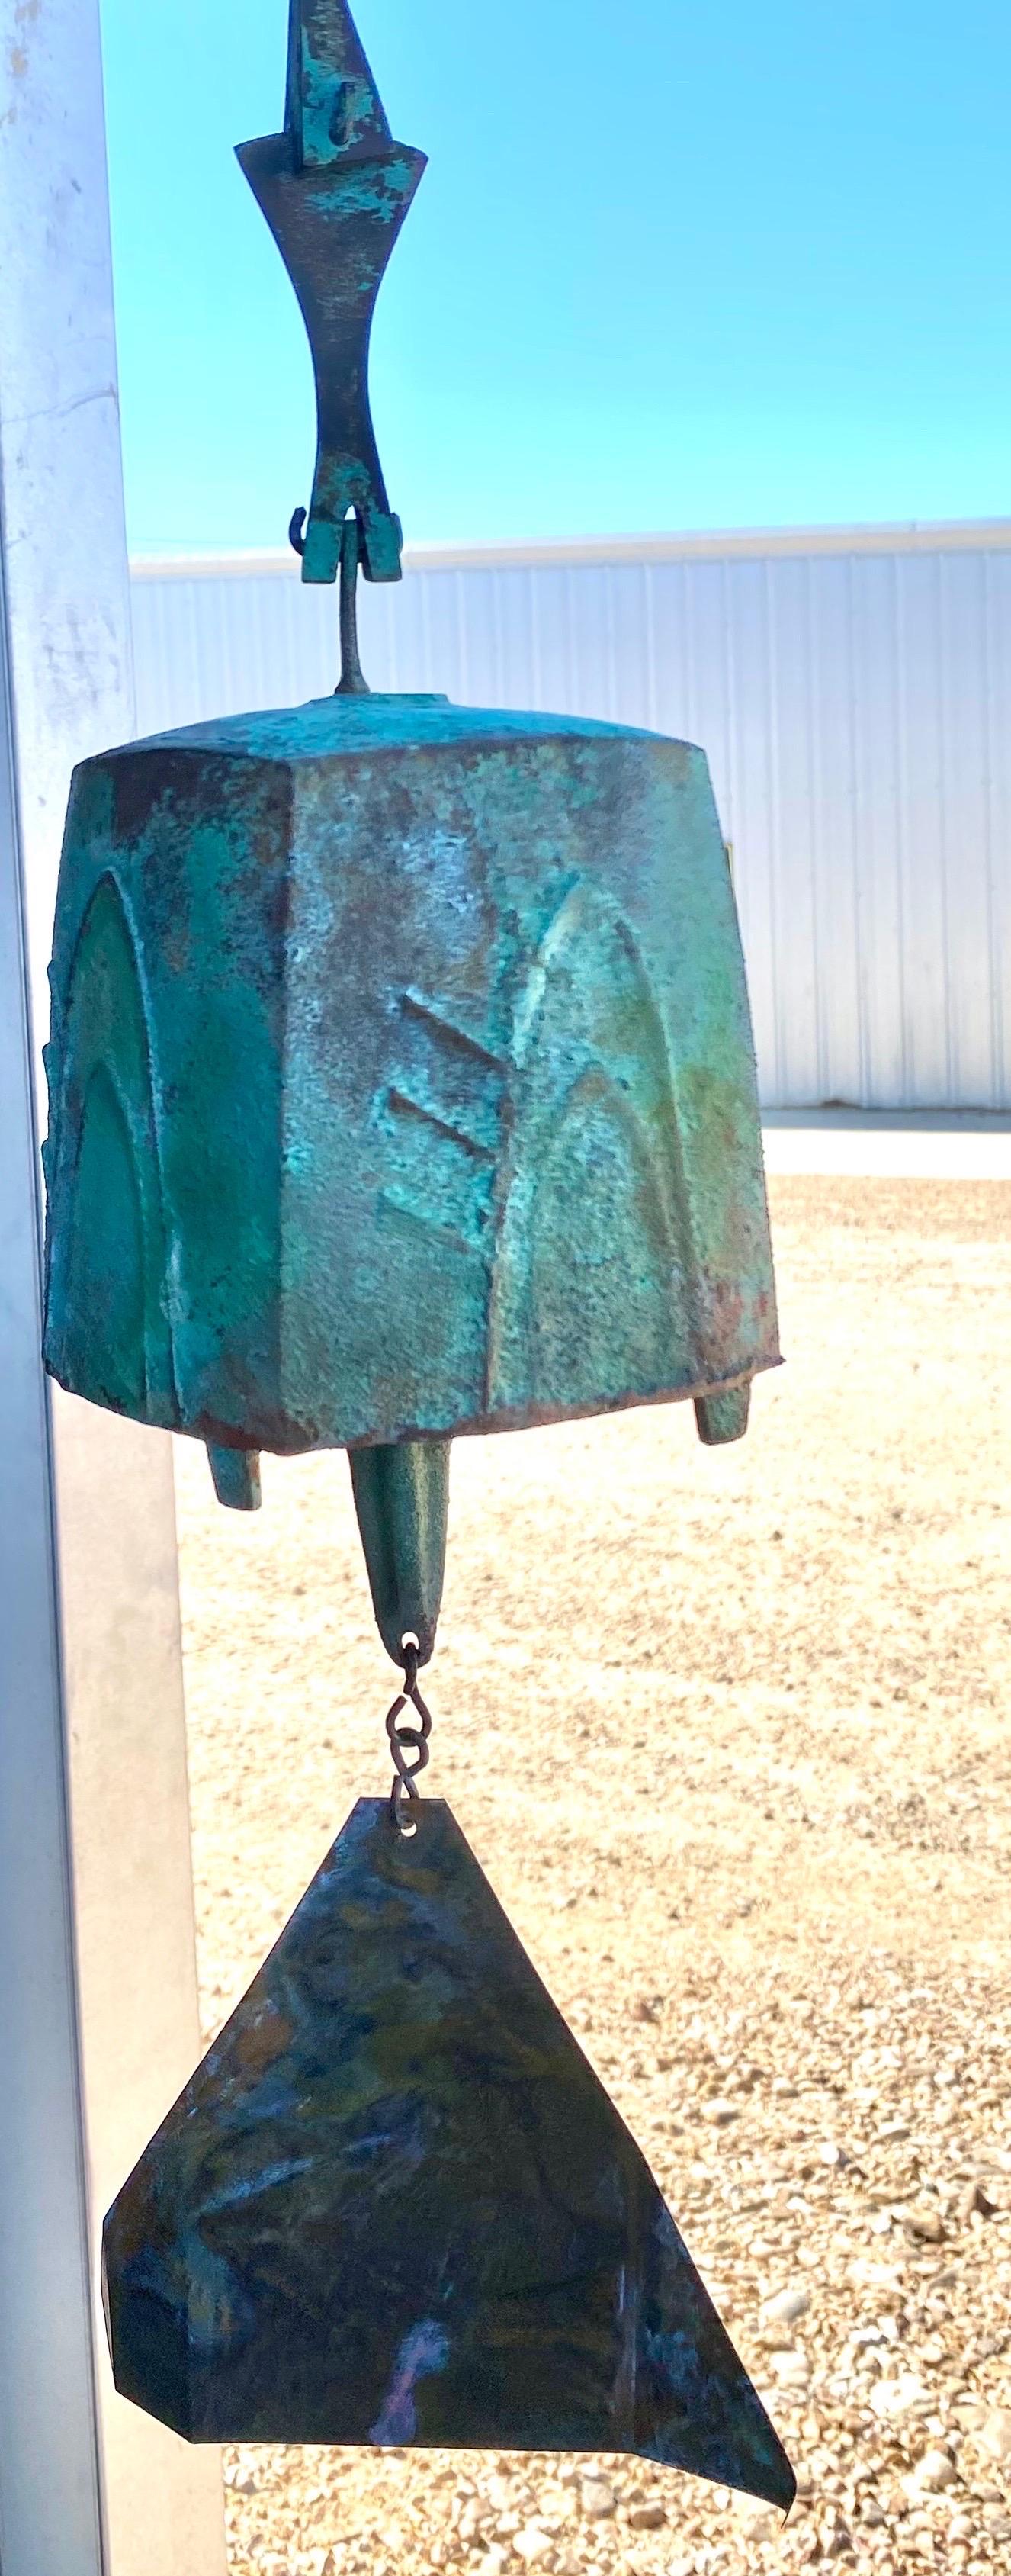 Vintage hanging sculpture windchime bell by Paolo Soleri features a beautiful patina, offers a deep rich sound, and is in great overall condition. 
Dimensions: 5.25